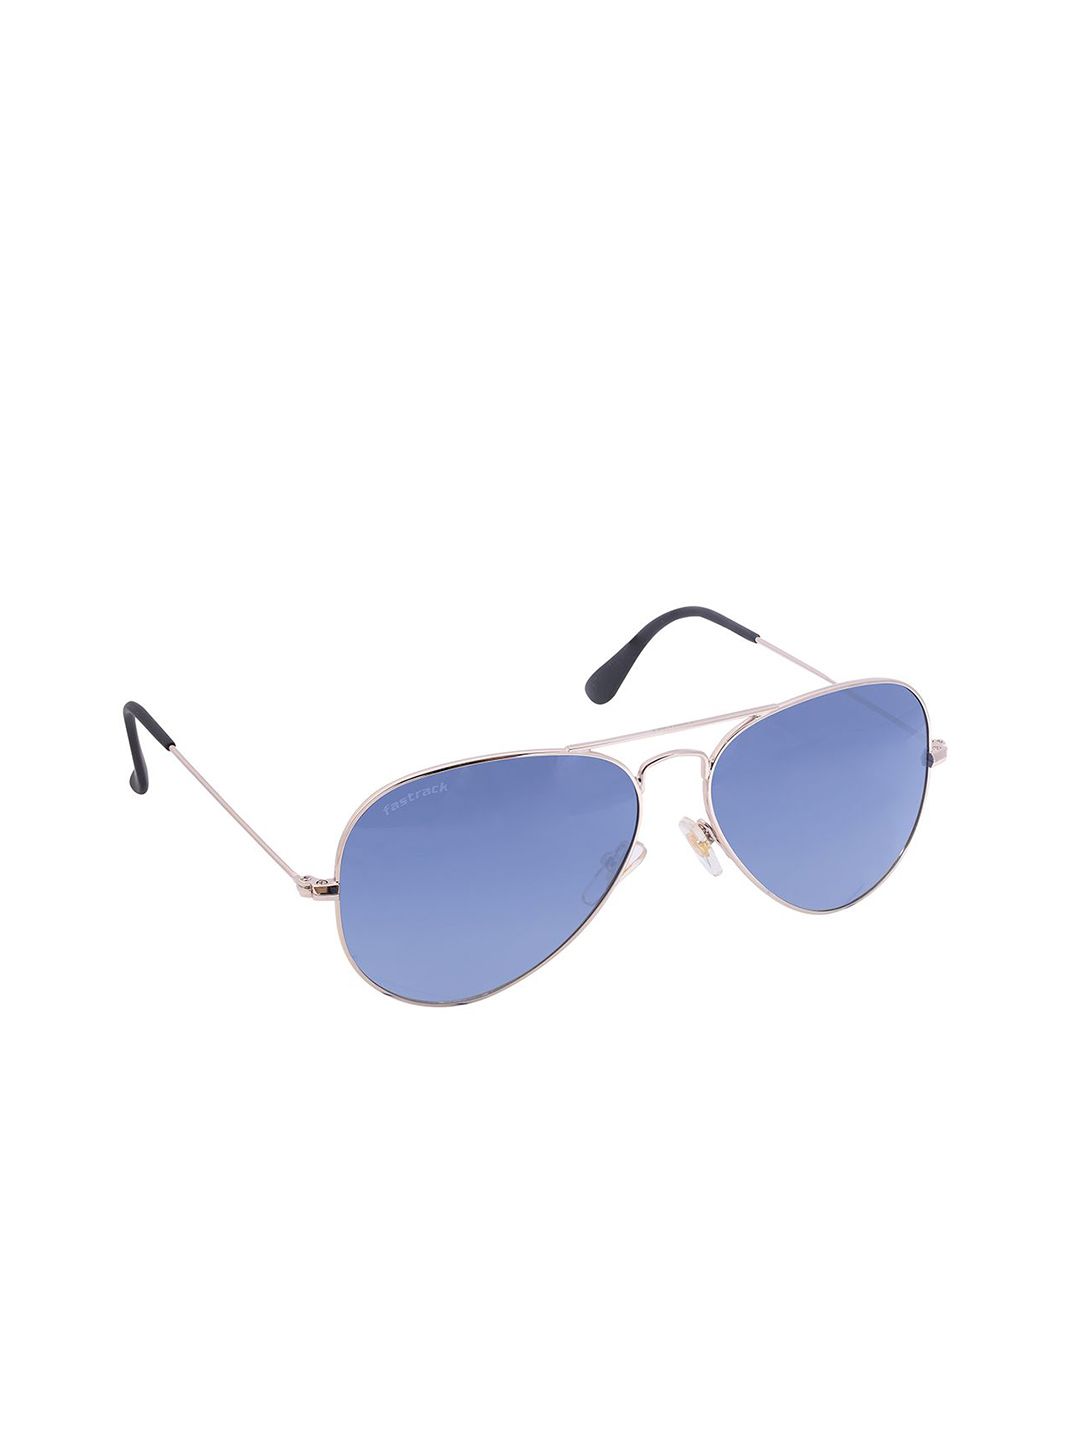 Fastrack Unisex Blue Lens & Gold-Toned Aviator Sunglasses with UV Protected Lens M165BR16P Price in India